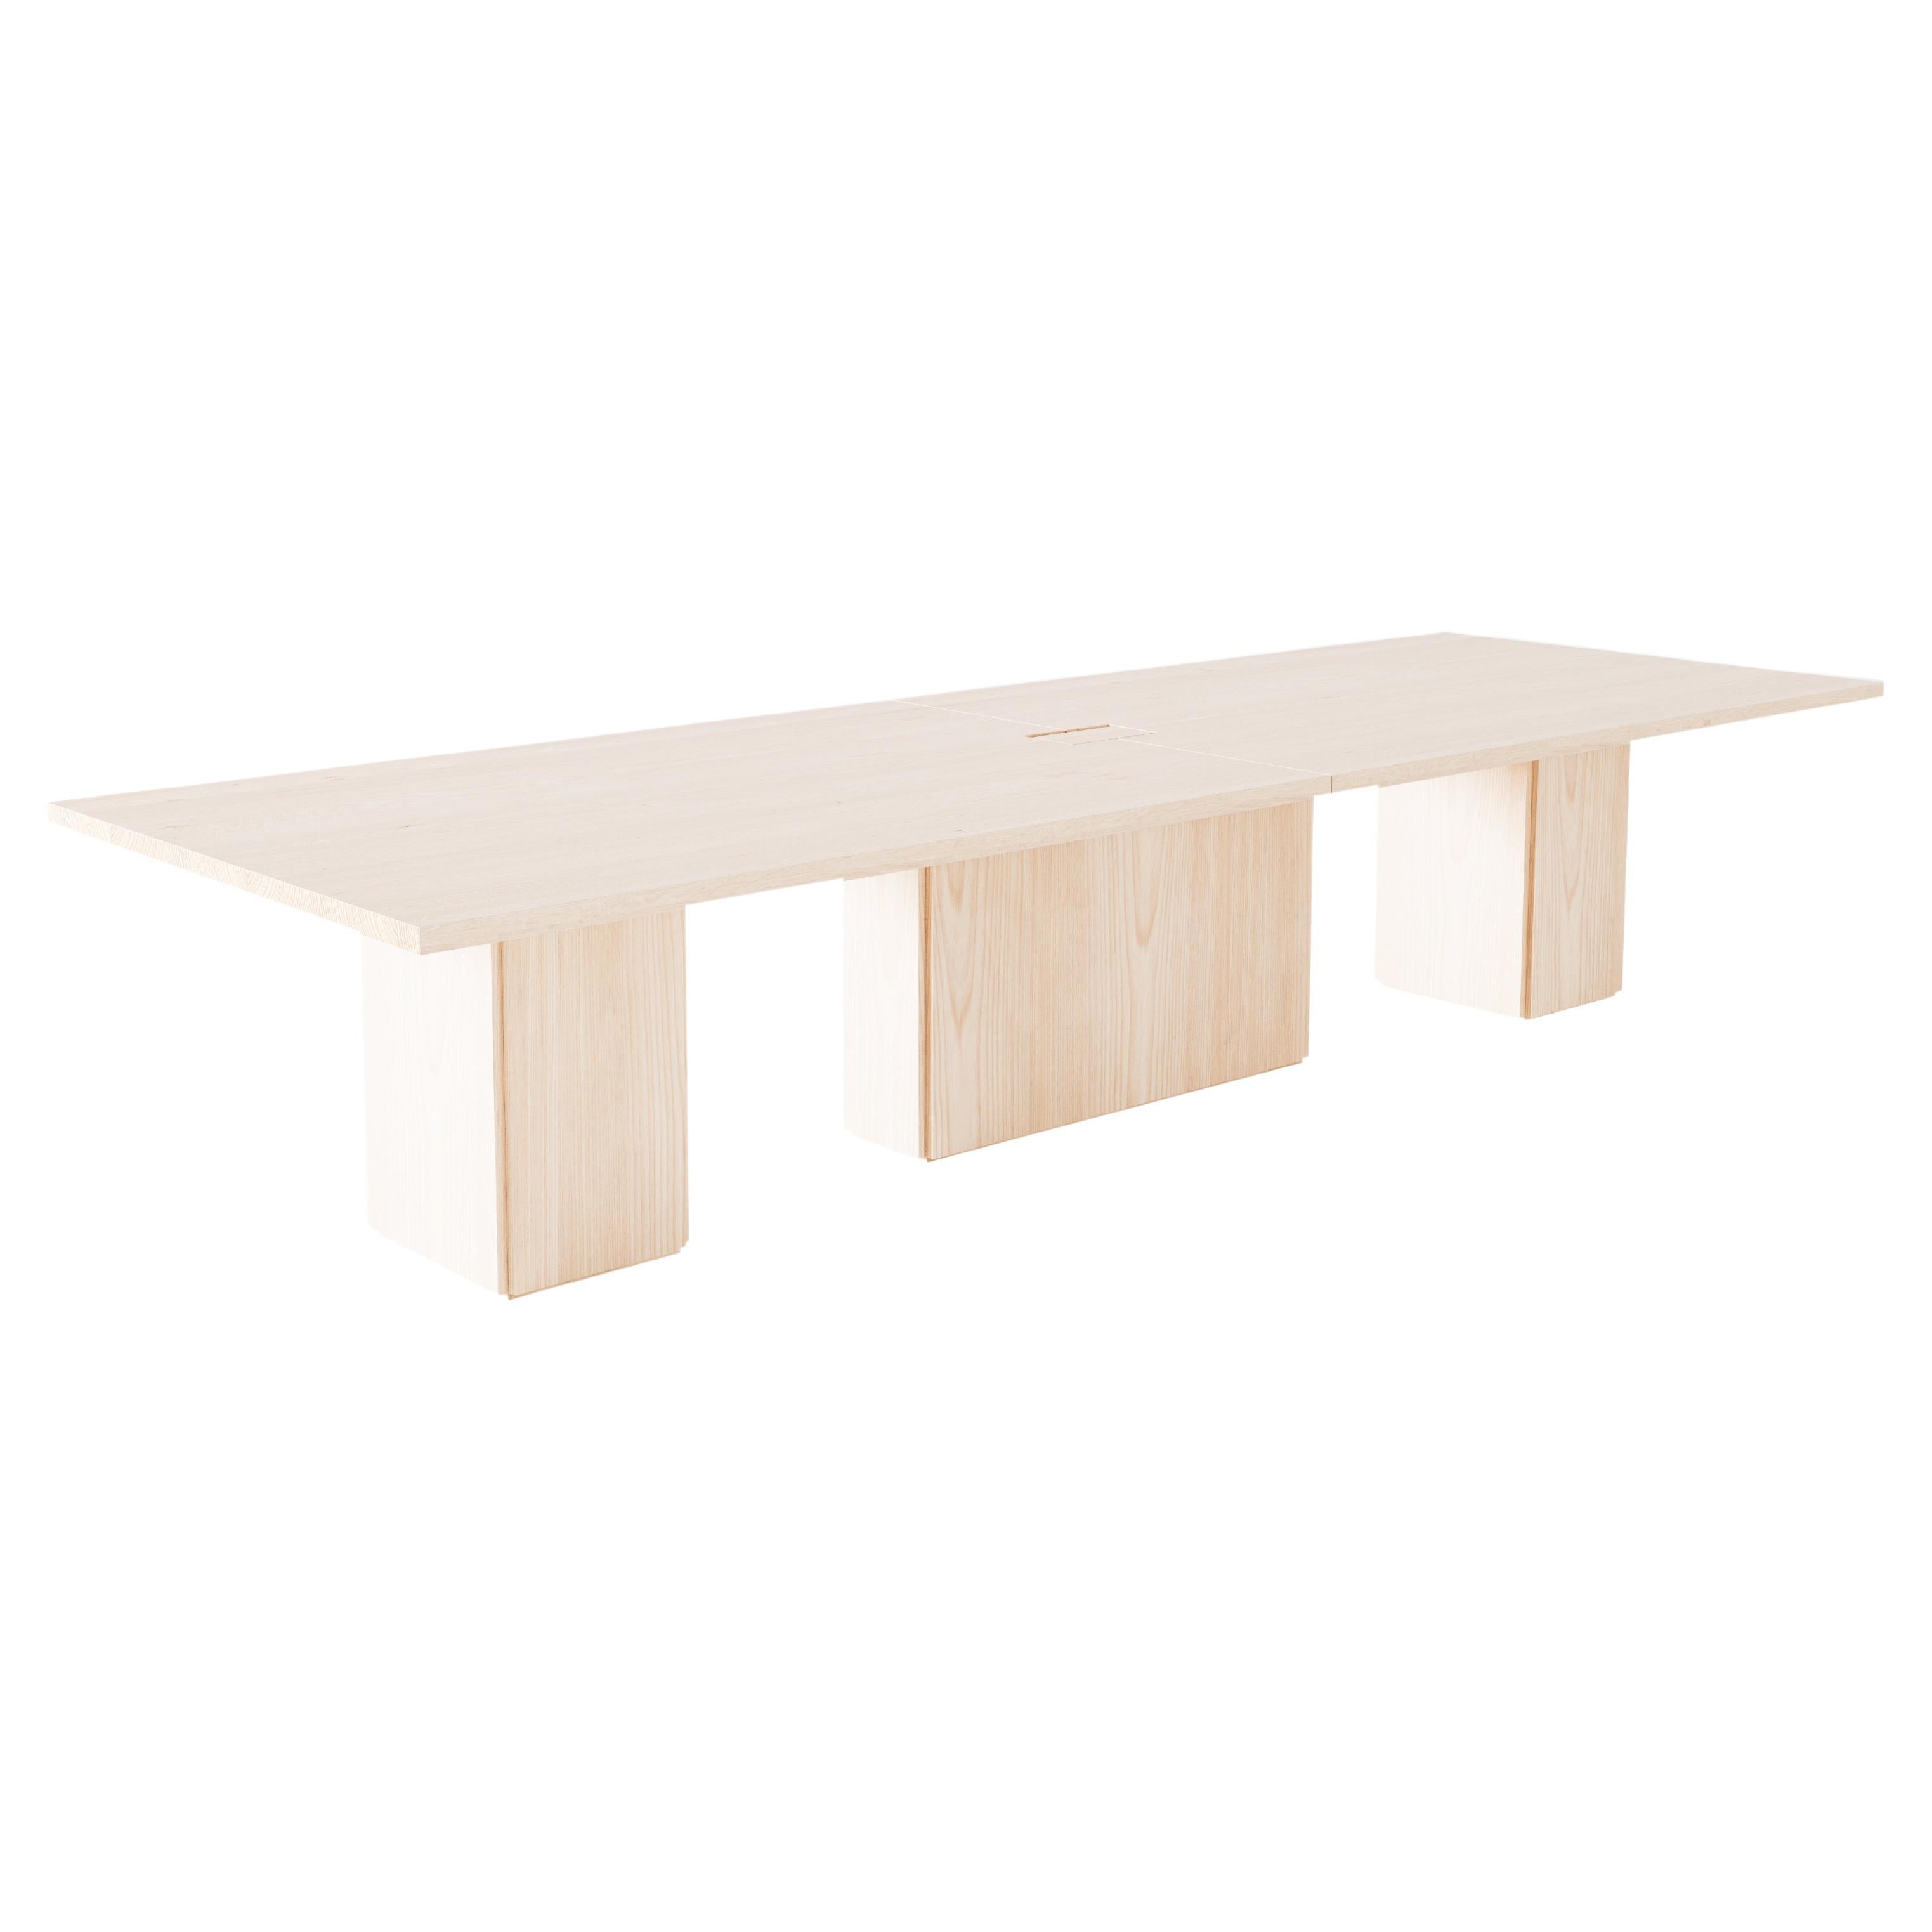 Customizable "Slab" Modern Conference Table For Sale